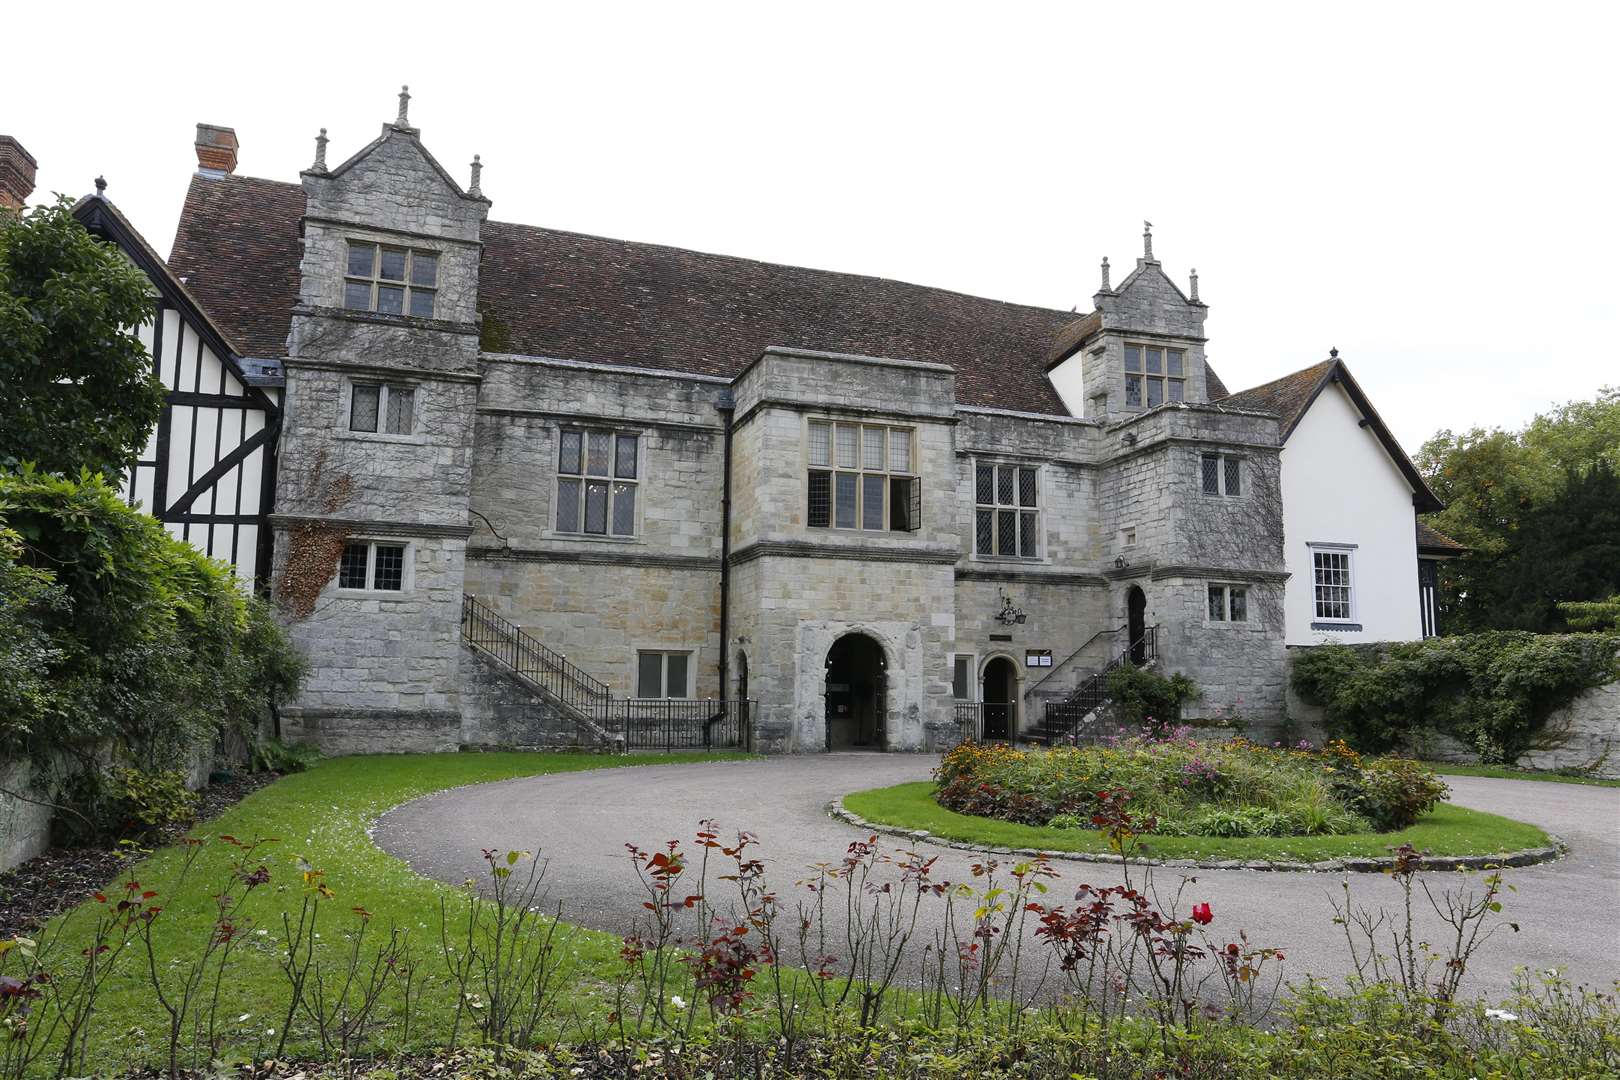 The inquests took place at Archbishop's Palace, Maidstone